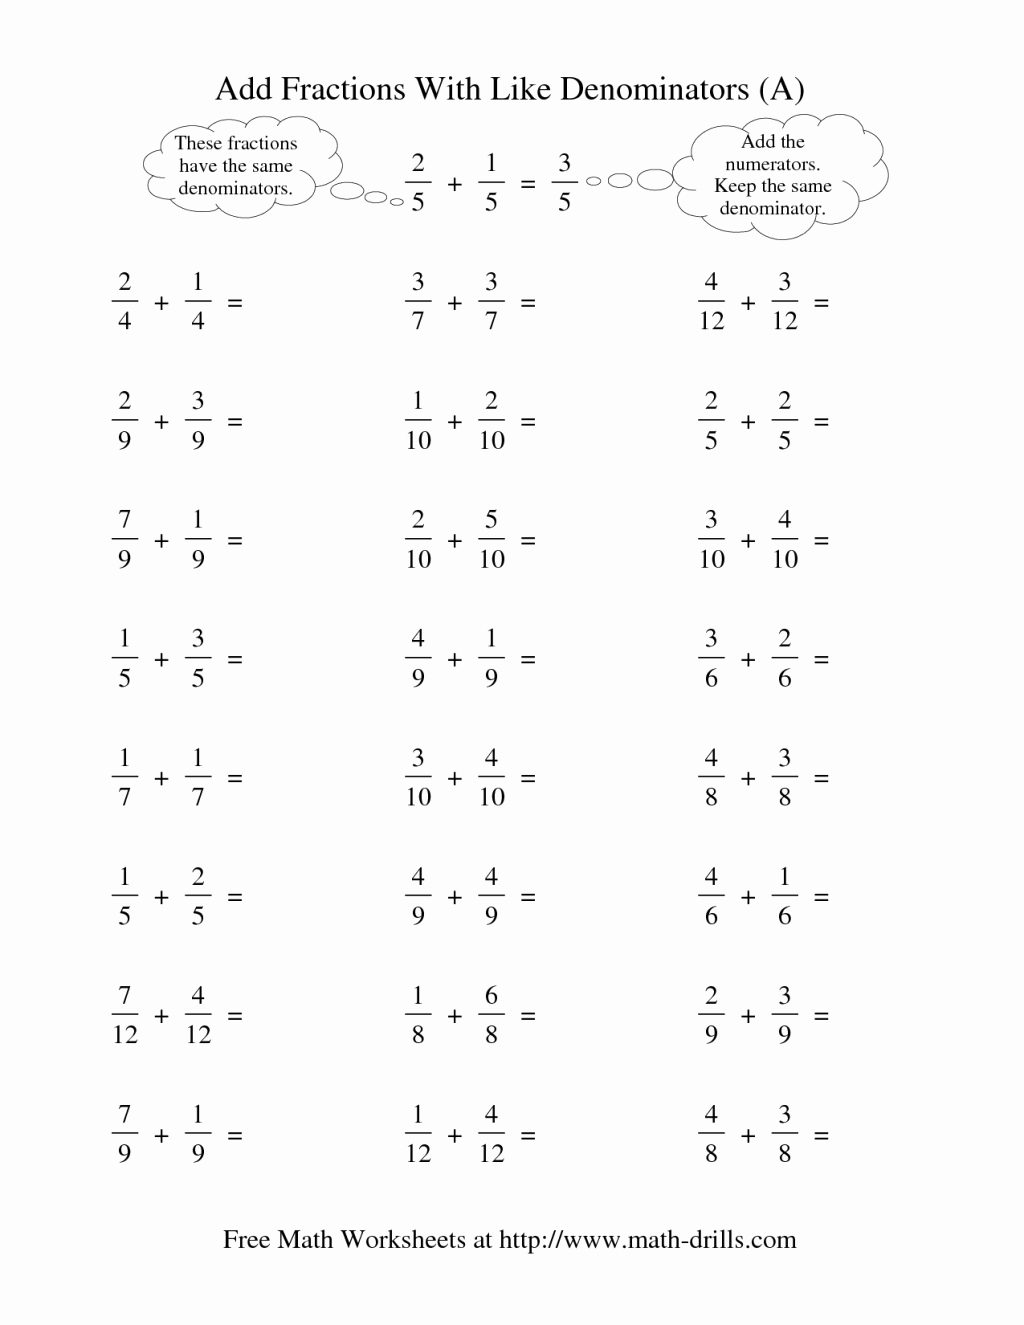 Adding Fractions Worksheet Pdf Fresh Adding and Subtracting Fractions with Unlike Denominators